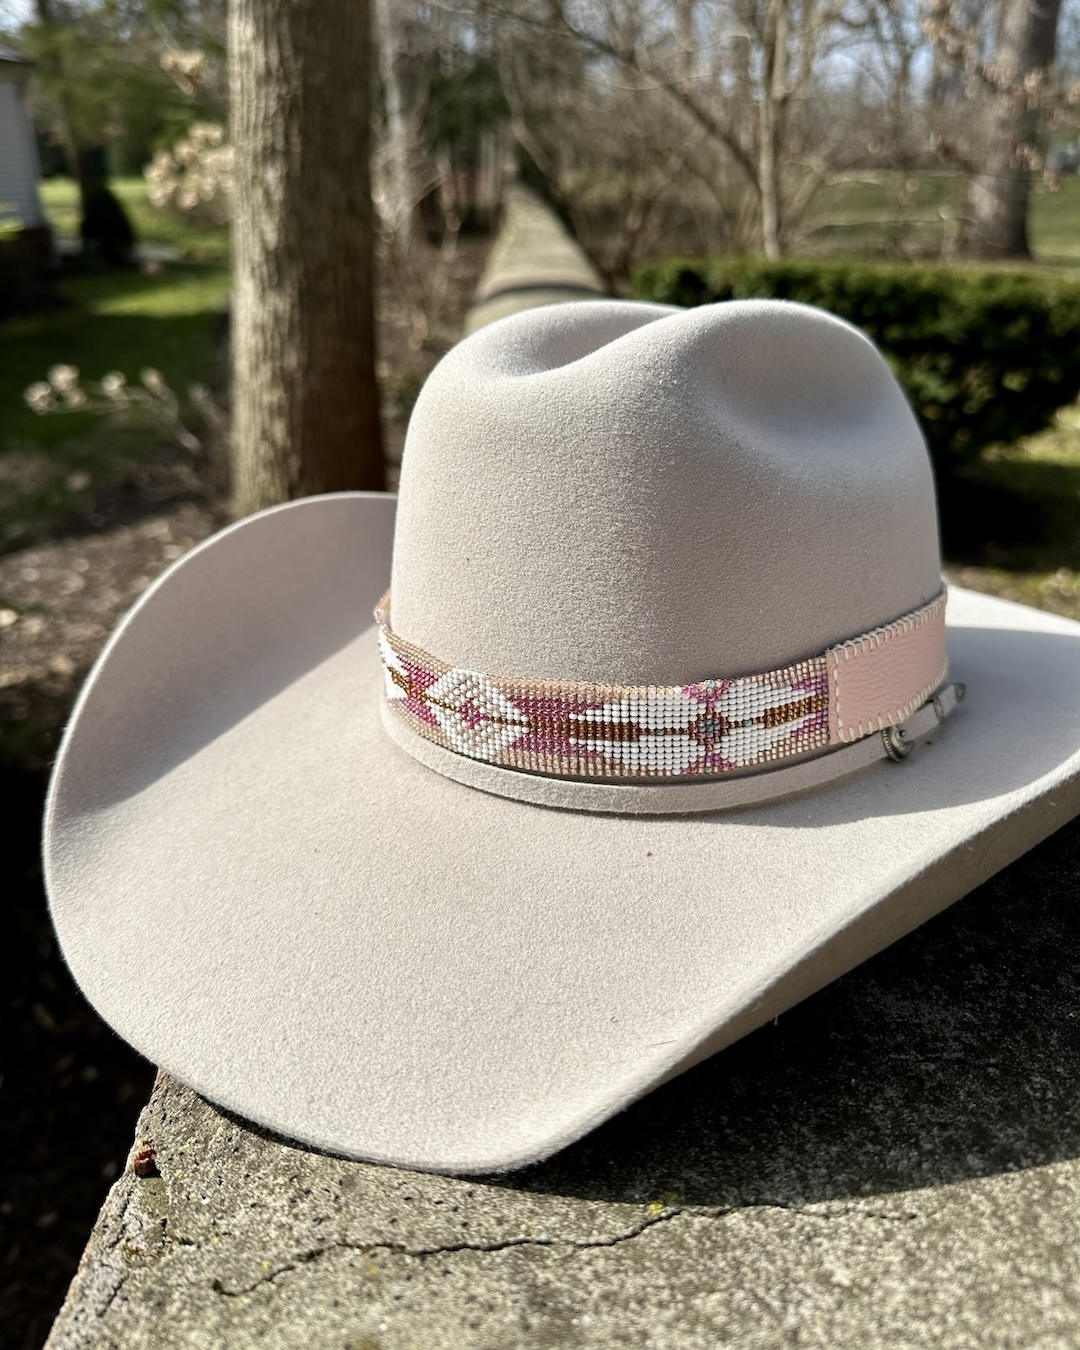 Pink and White beaded hatband on cowboy hat.